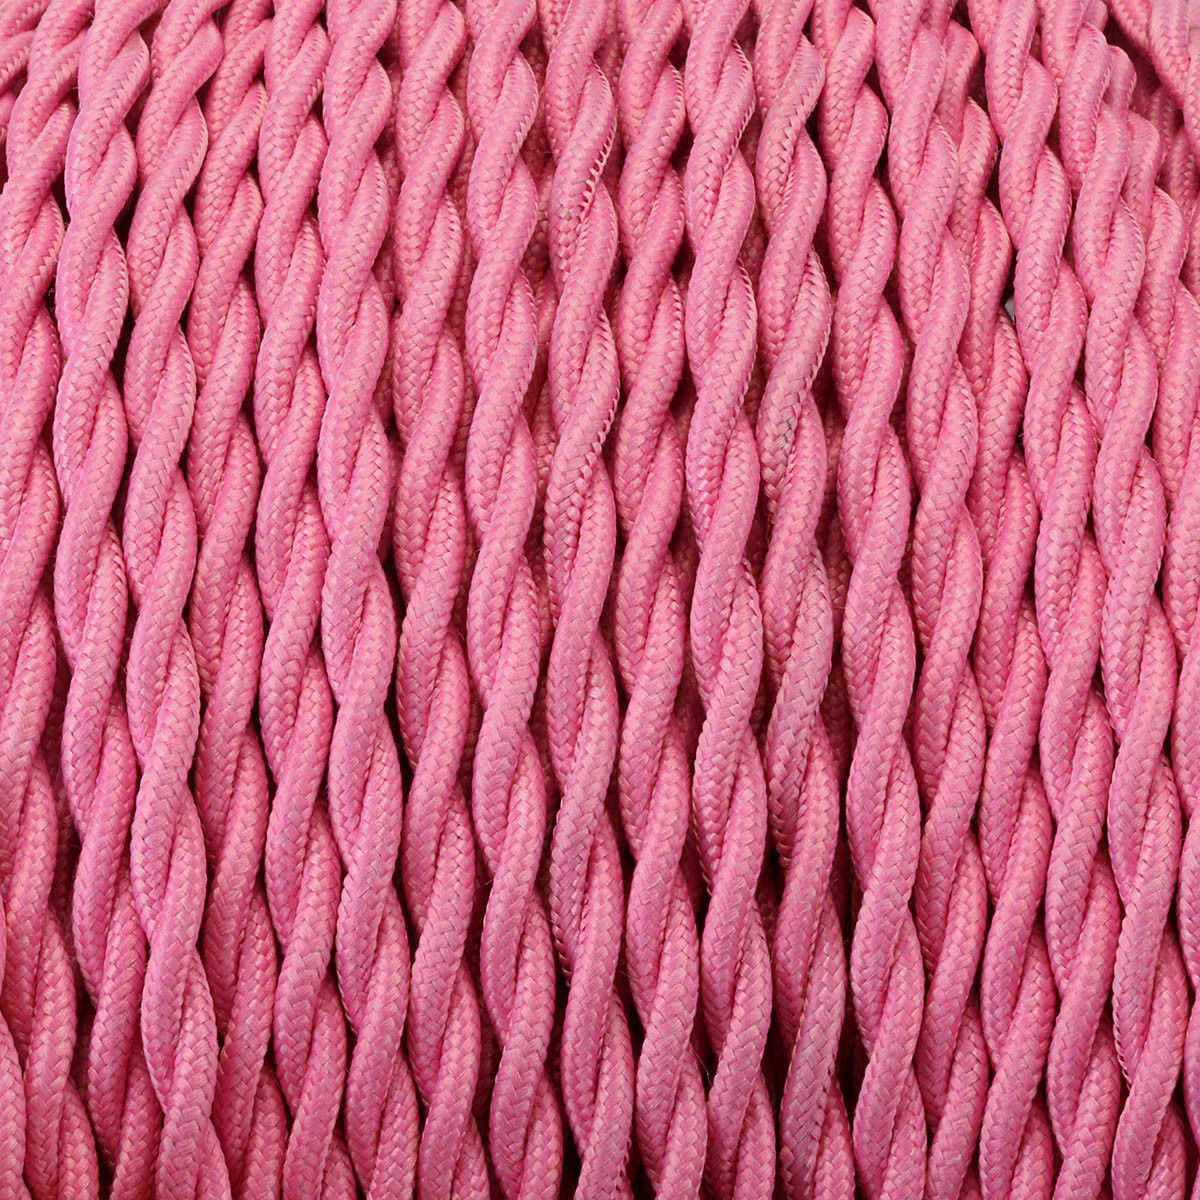 Pink Electrical twisted Cable.JPG